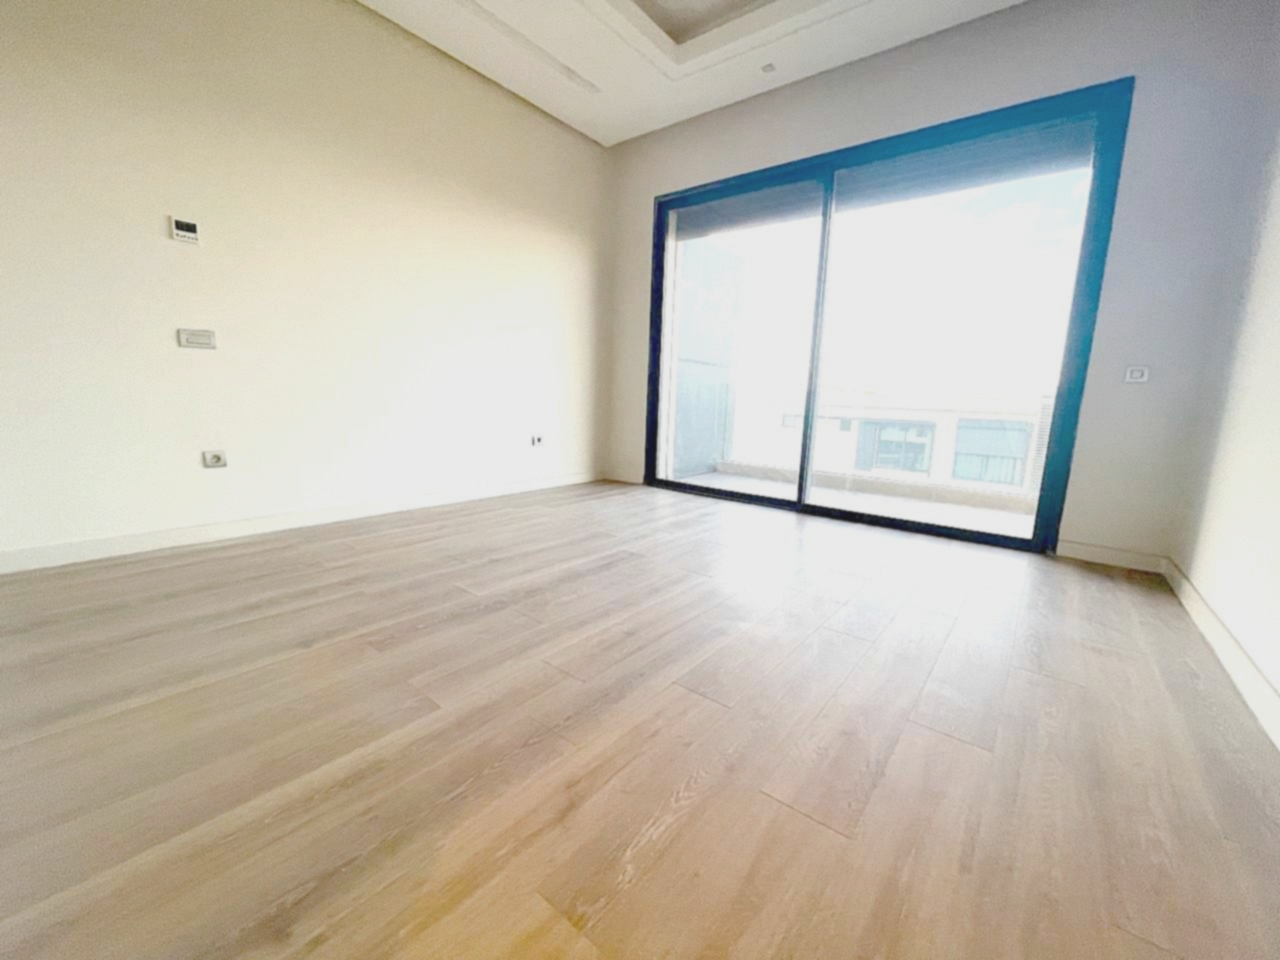 Apartment for Sale 3 100 000 dh 200 sqm, 3 rooms - Route d'Azzemmour 